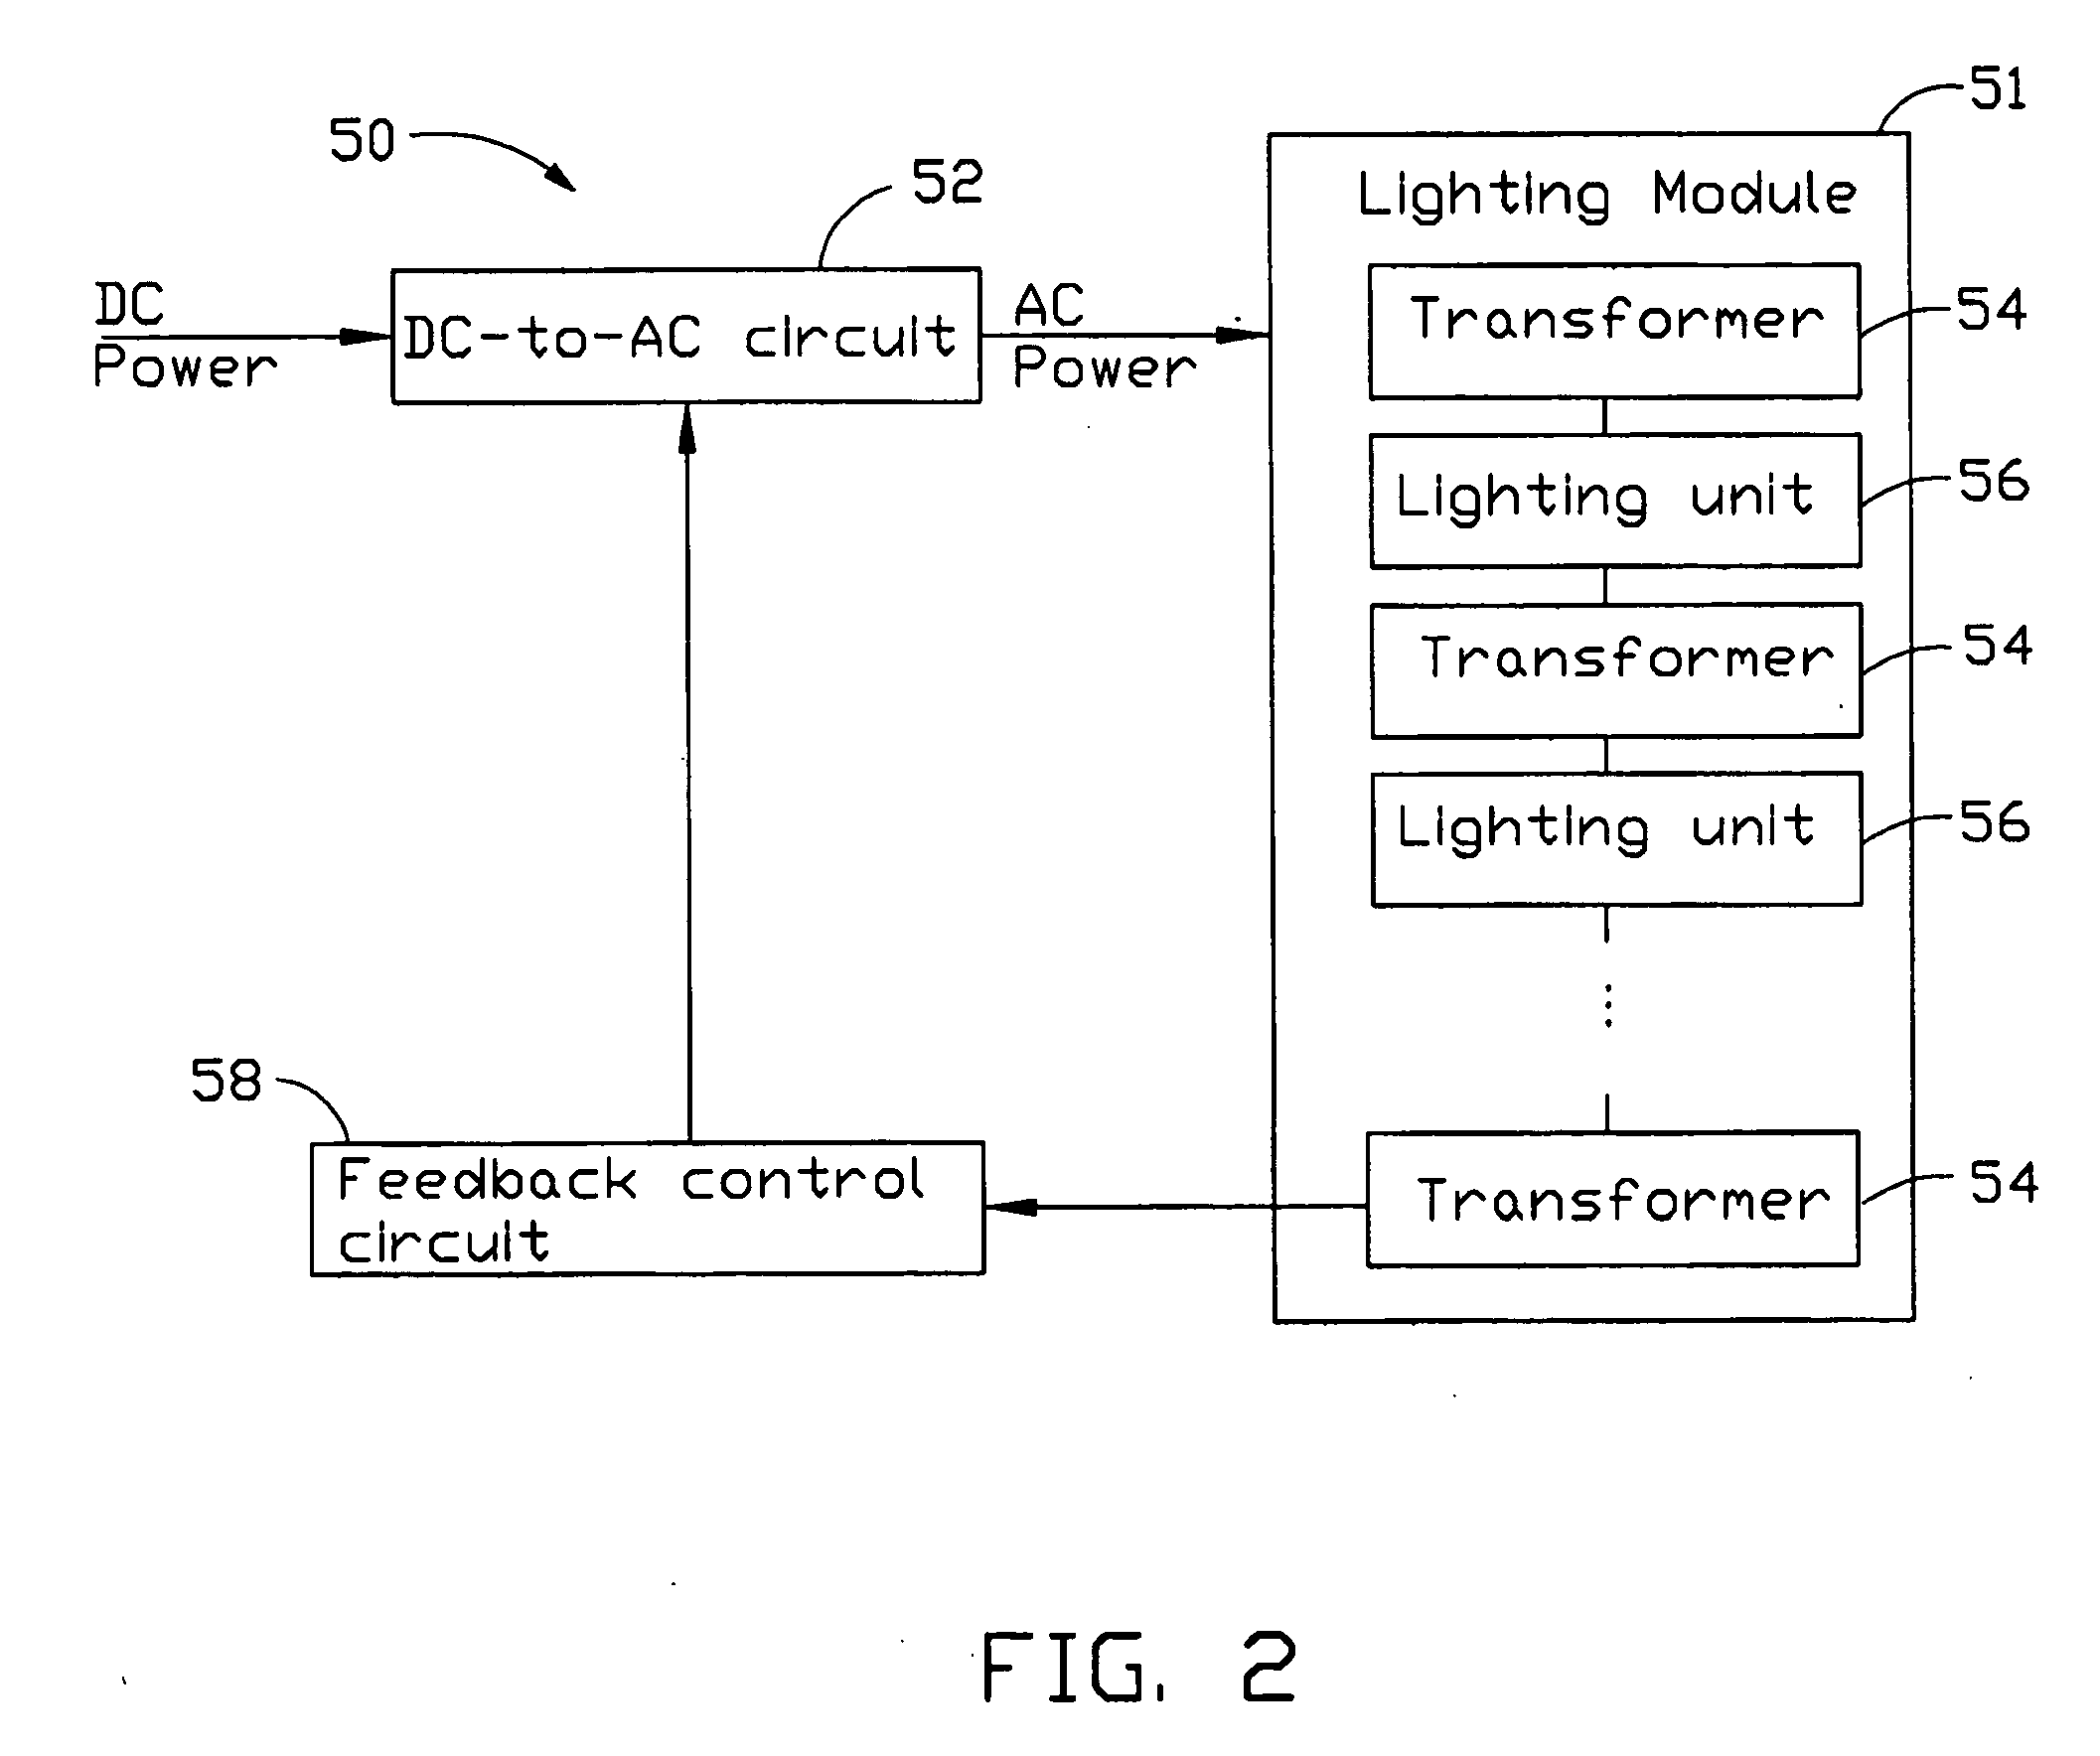 Lighting apparatus formed by serially-Driven lighting units